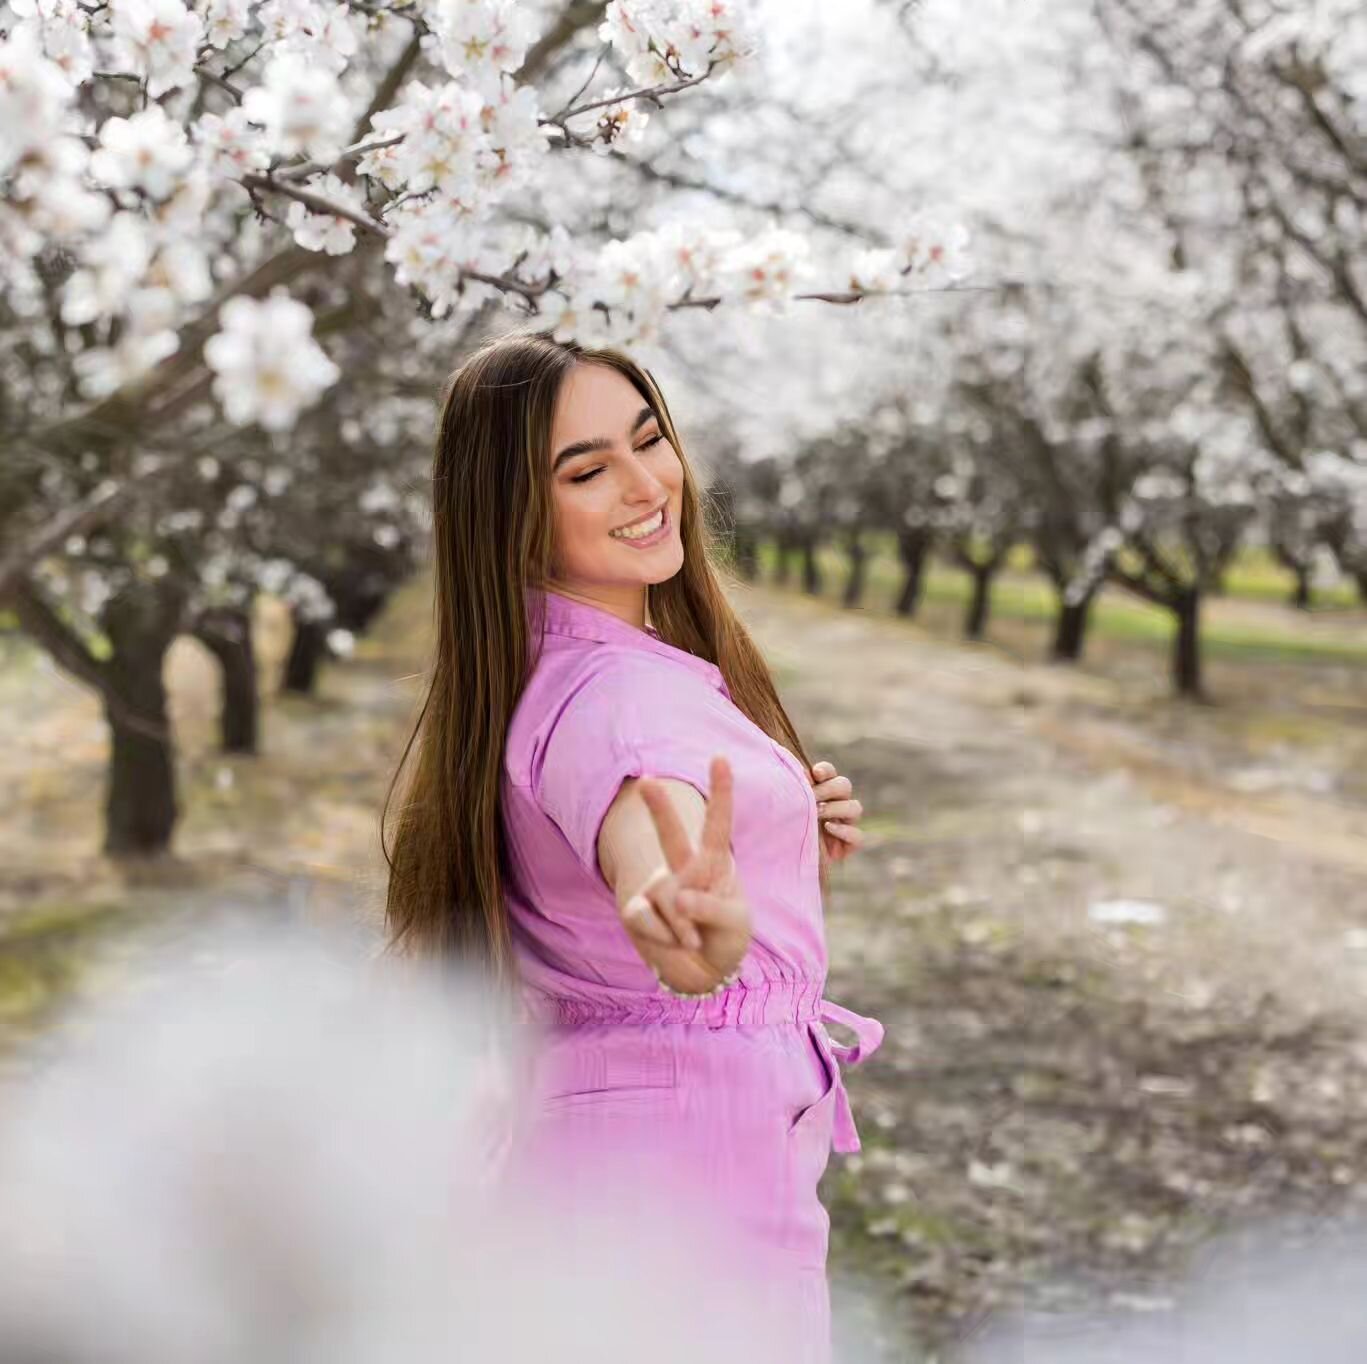 Class of 2024 this is your sign to contact me if you want to incorporate the blossoms into your senior session in February!! They are only around for 3 weeks!

DM me for info 🌸

PS, When your on the senior team you get a chance to do this! Class of 